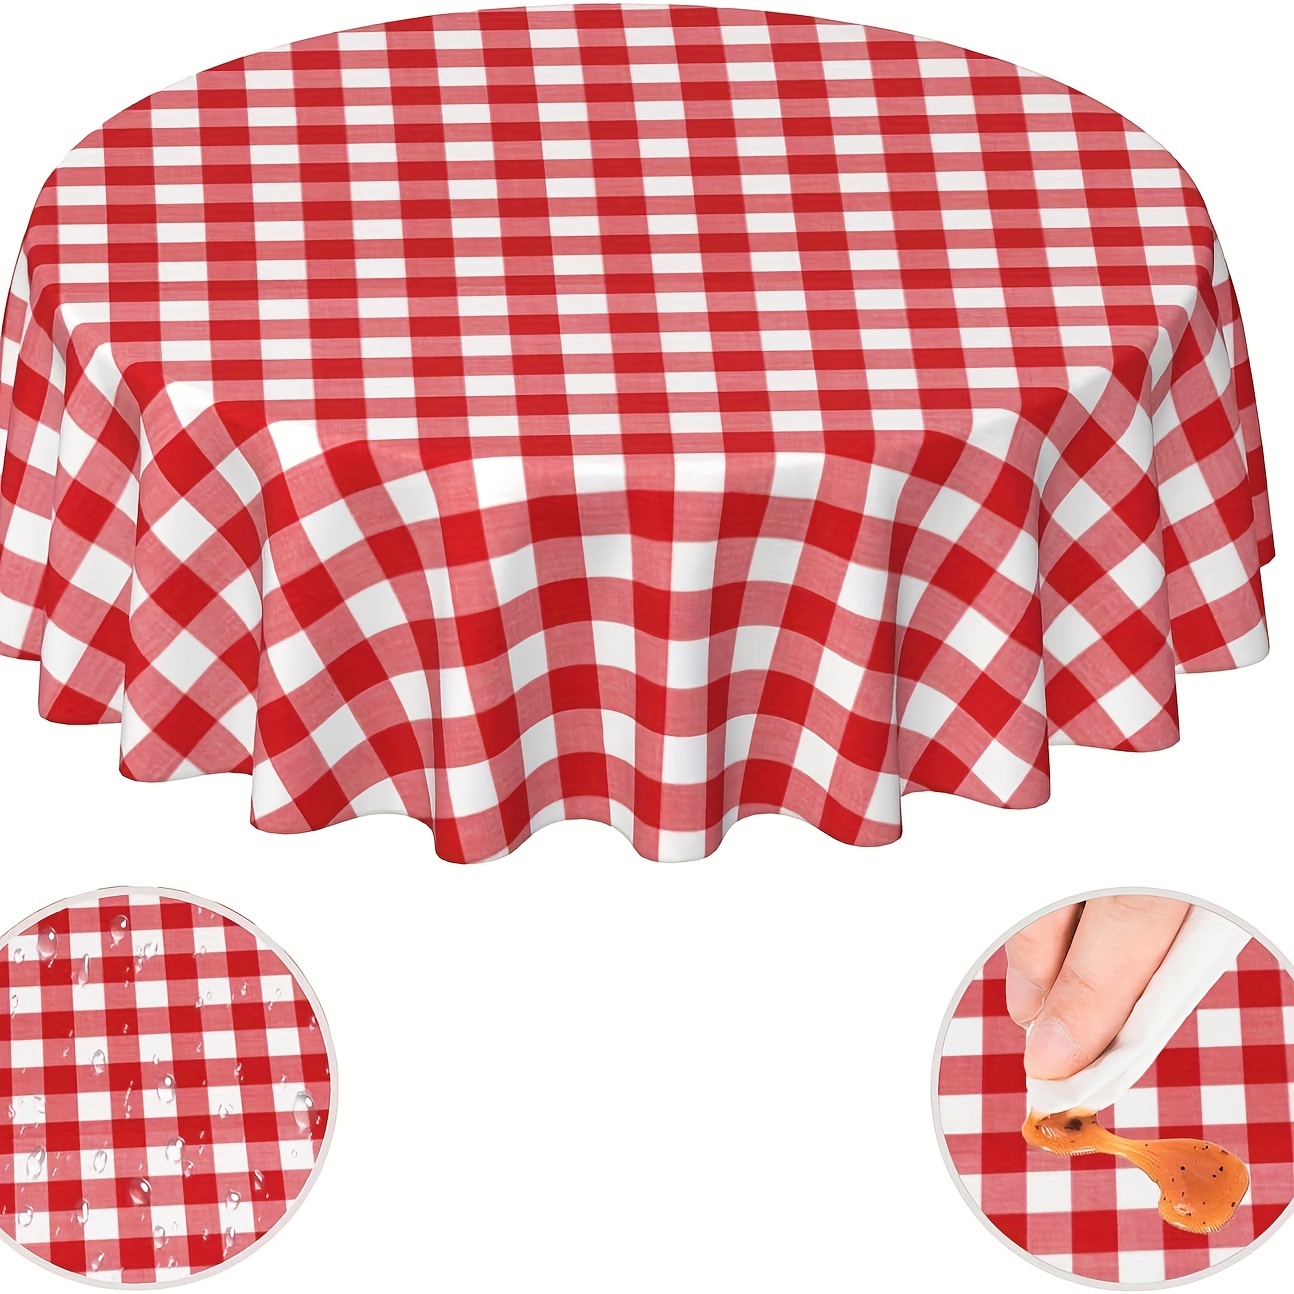 

Vinyl Round Tablecloth, Easy Clean Waterproof Oil-resistant Flannel Backed Table Cover For Dinner, Kitchen, Picnic, Outdoor Patio - Red And White Checkered Pattern, Machine Made Weave